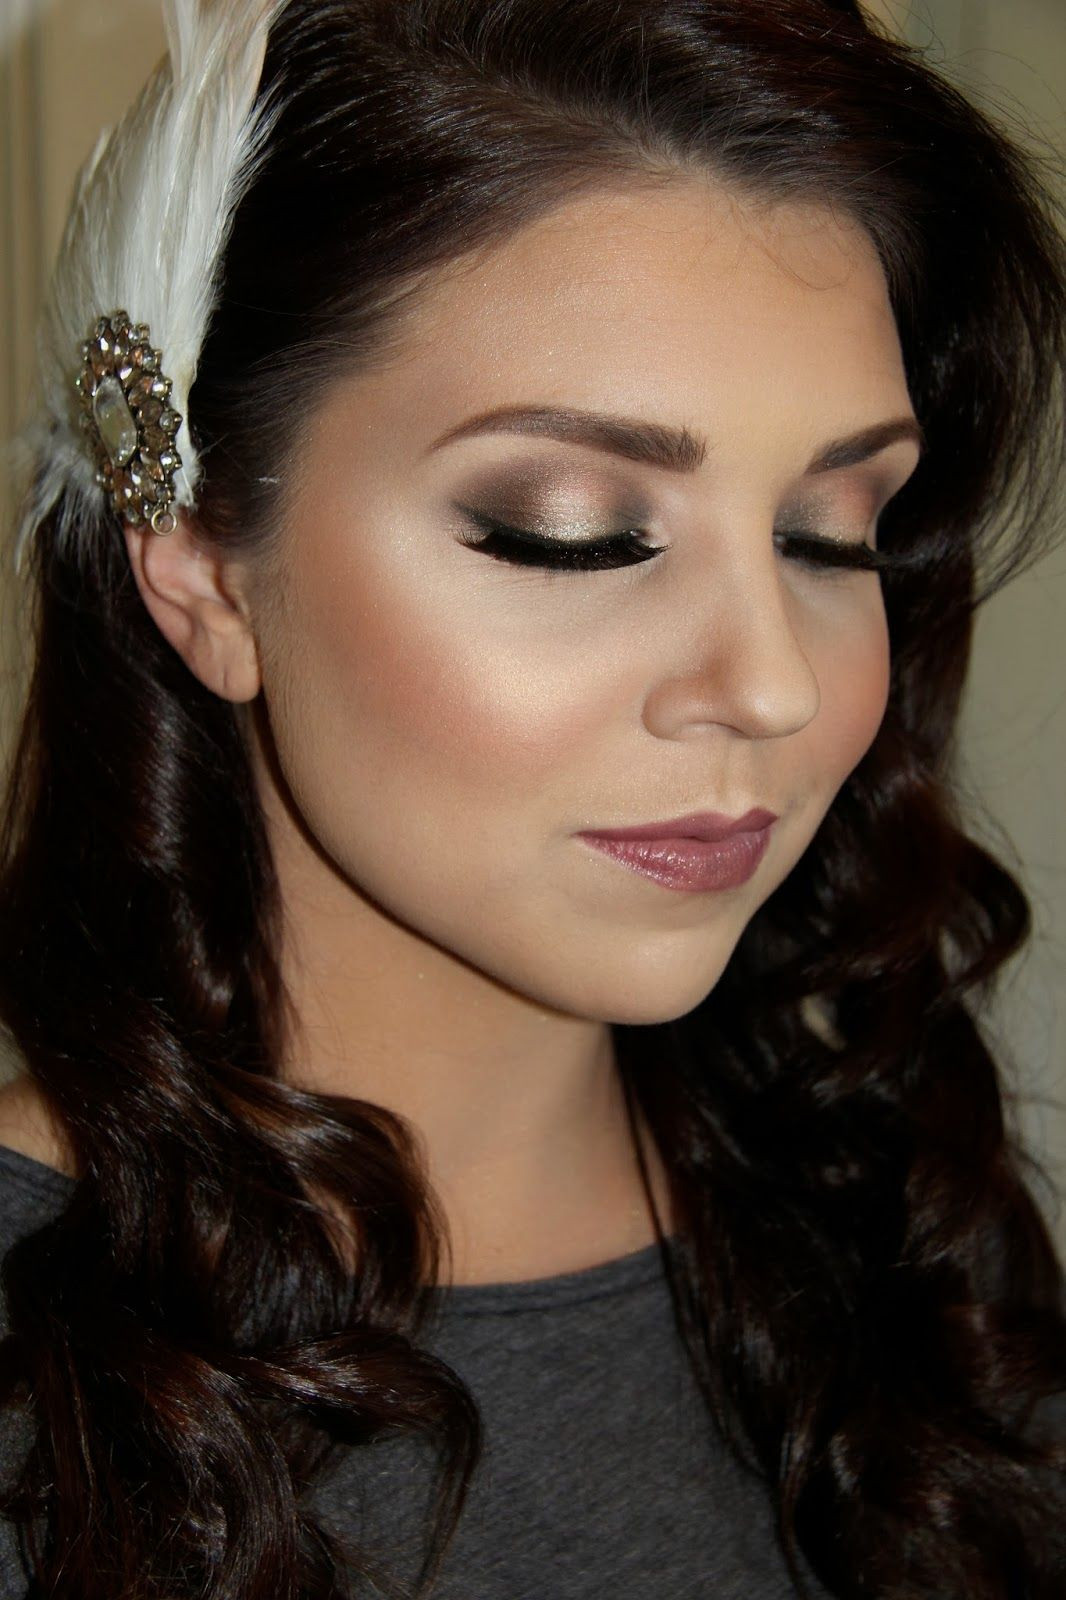 Vintage Wedding Makeup
 Really like this makeup maybe just with a darker lip color